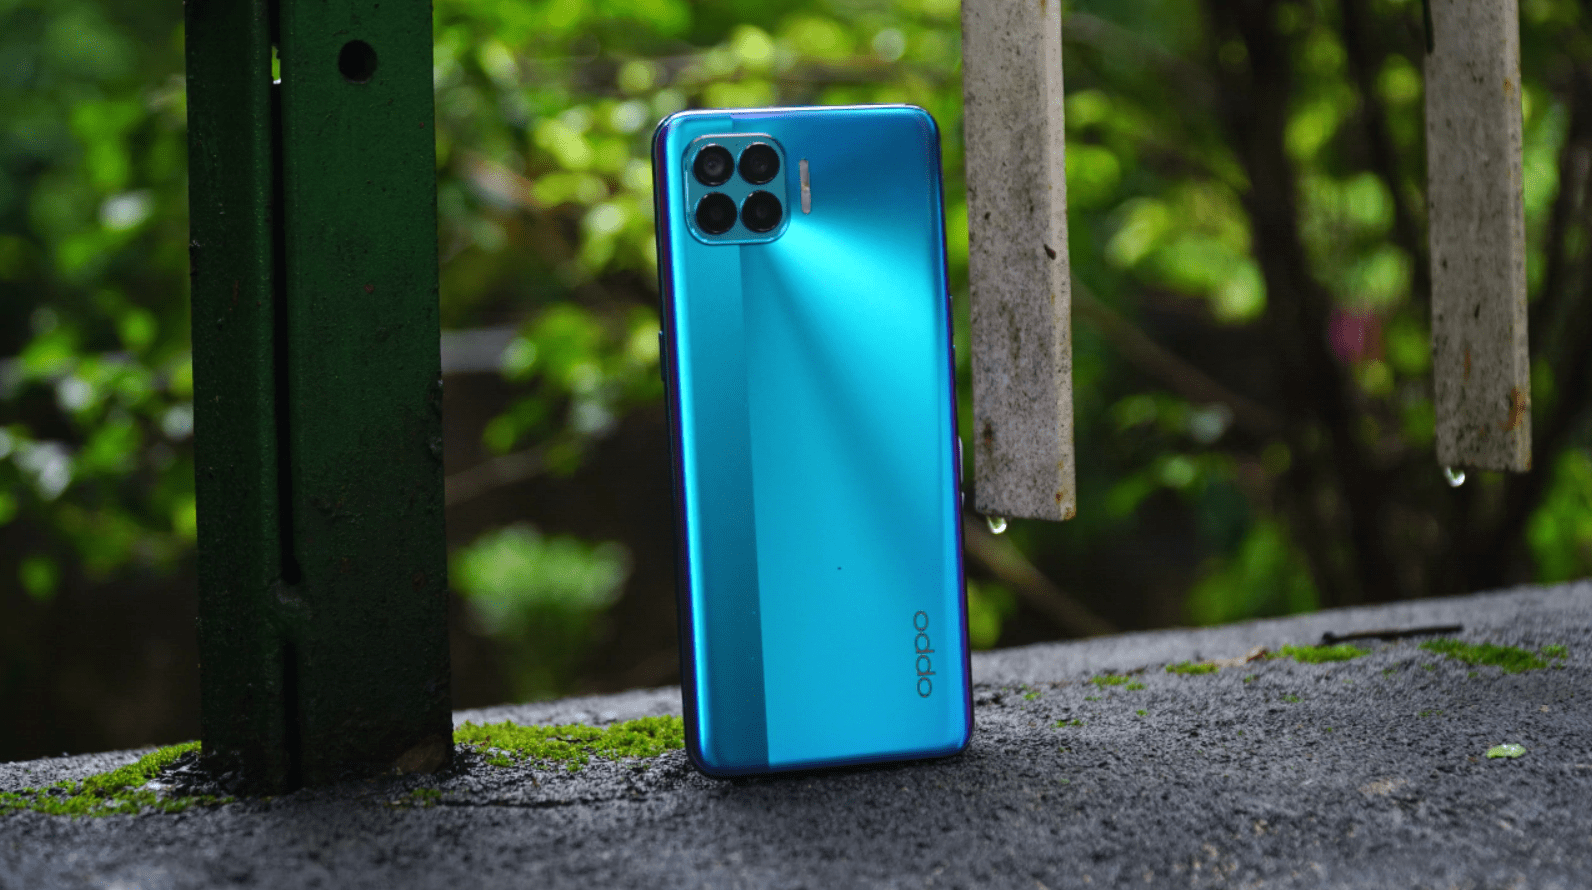 Oppo F17 Pro Gets a Price Cut